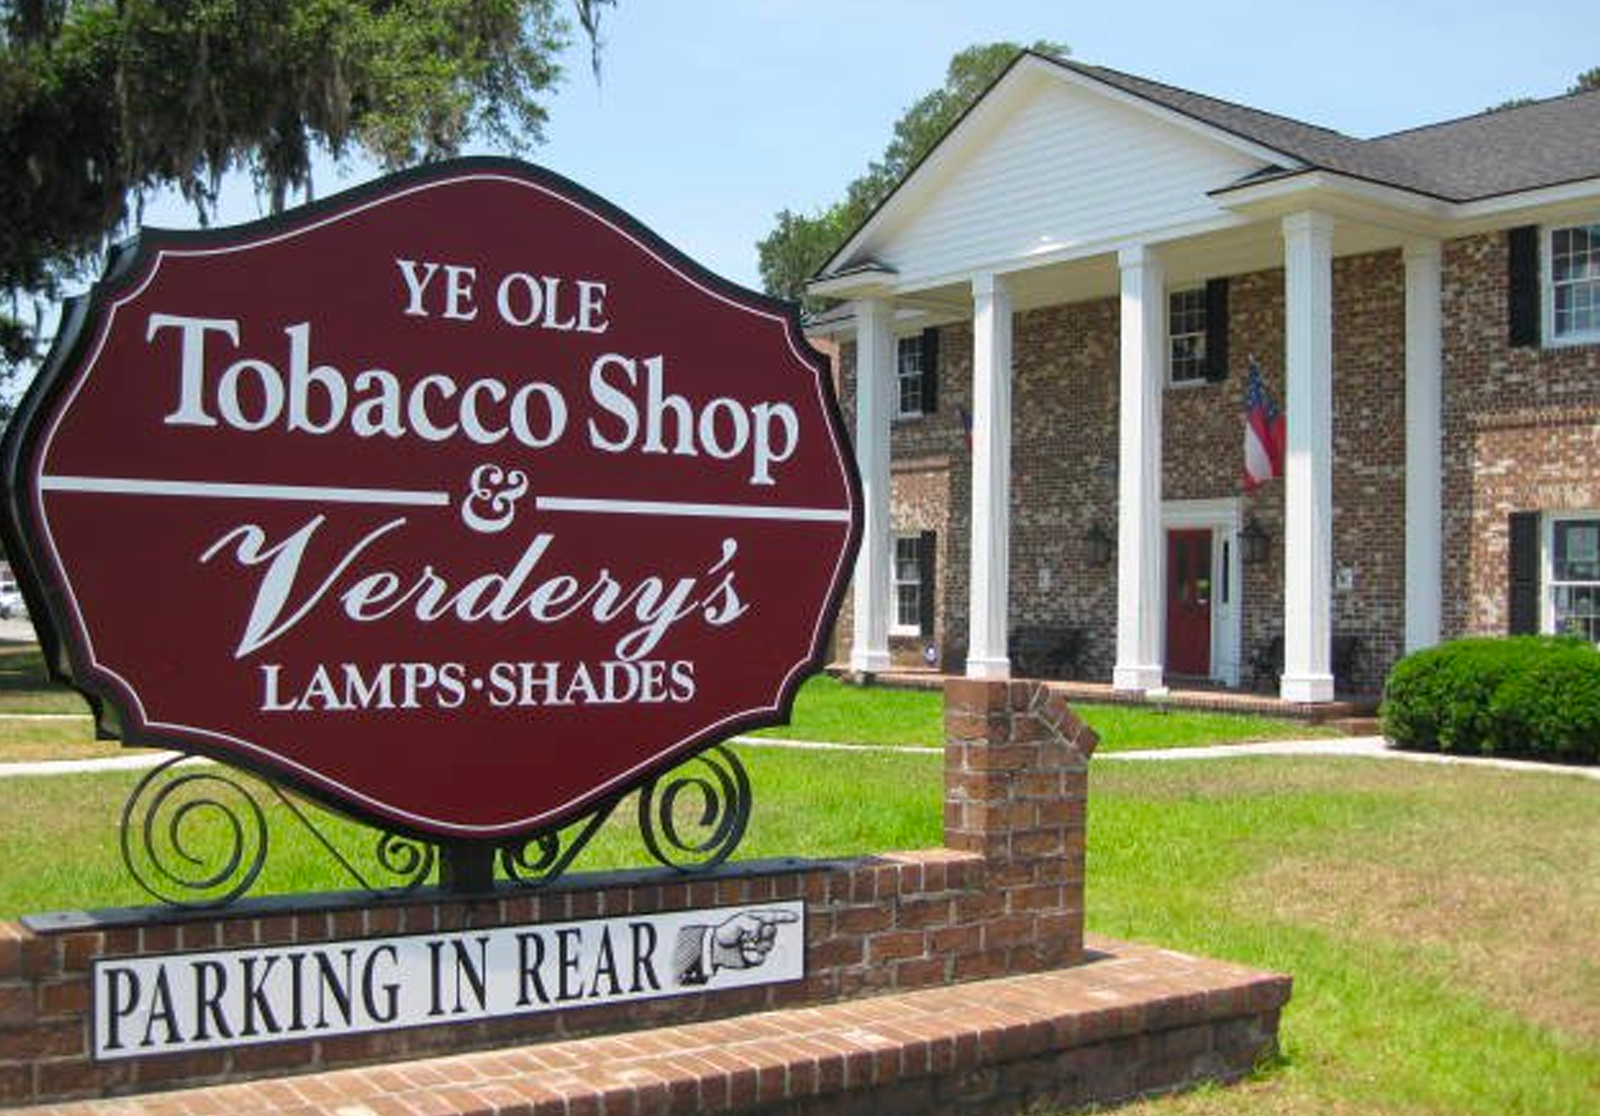 Ye Ole Tobacco Shop and Verdery’s Lamp Shades